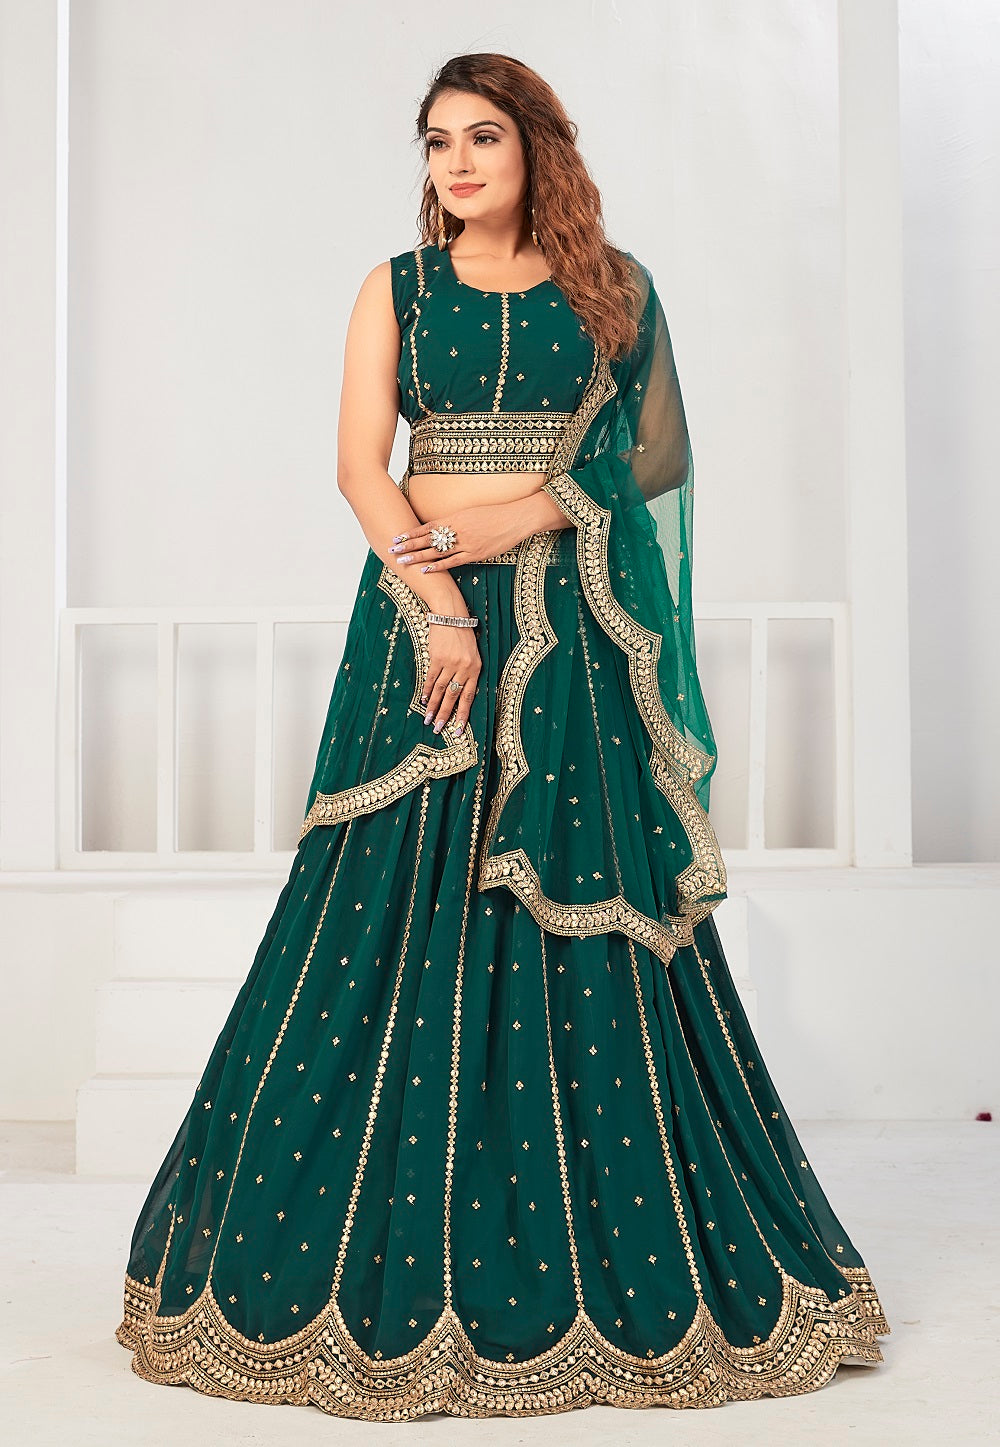 Georgette Embroidered Lehenga in Teal Green